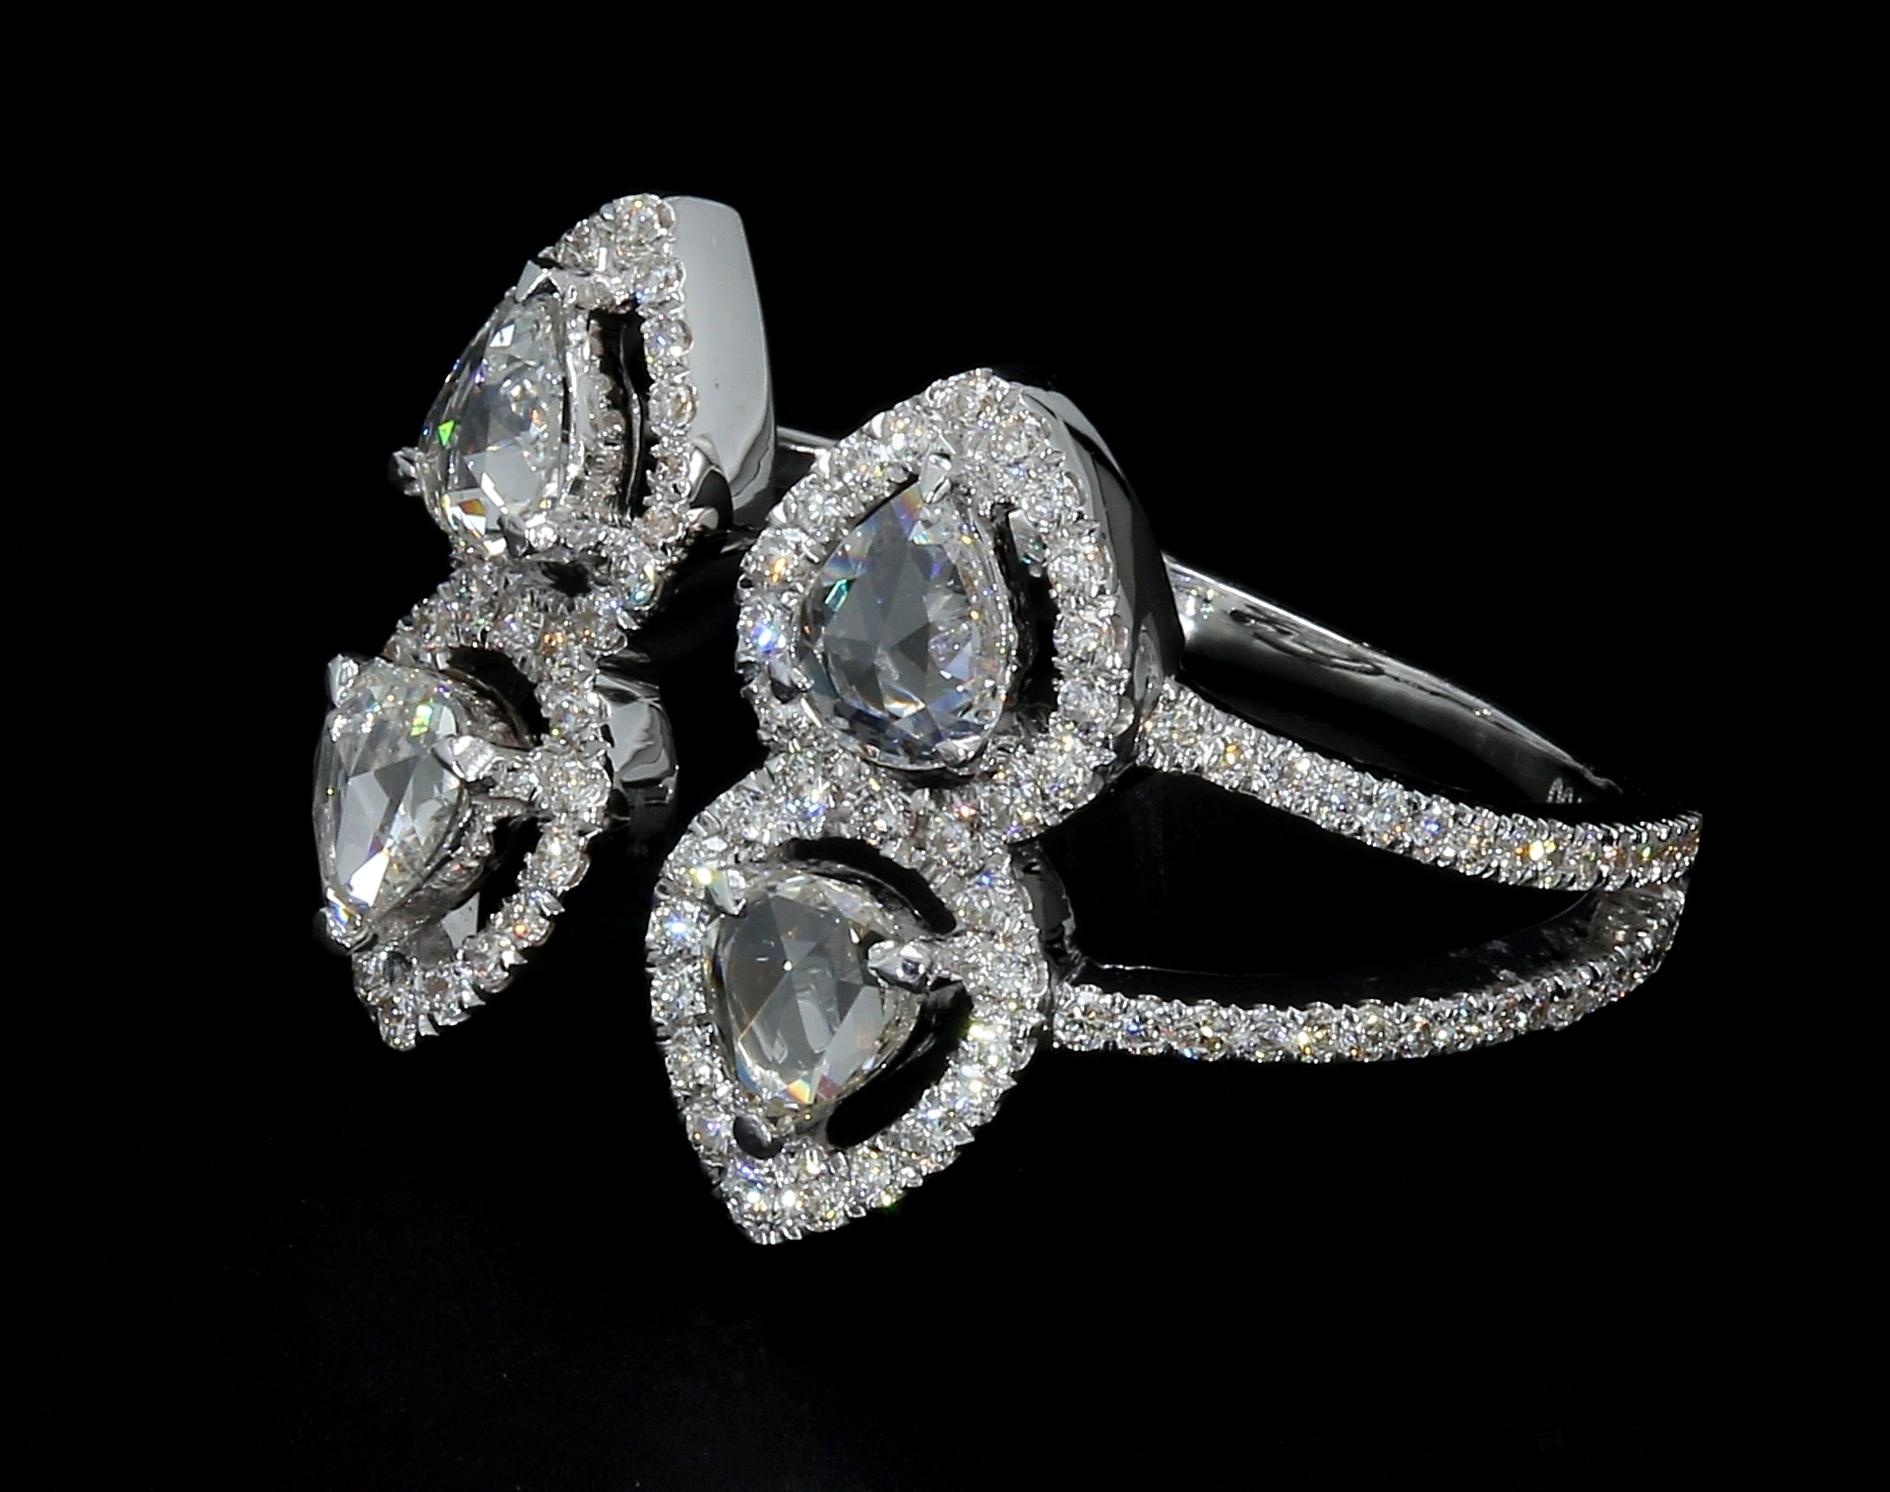 PANIM 0.83 Carat Rosecut Diamond Moi et Toi Ring with   in 18K White Gold

Set in 18K White Gold with top quality Rosecuts shapes in Pear.

Colour G+
Quality VVS/VS


Contact us on this platform to get more details